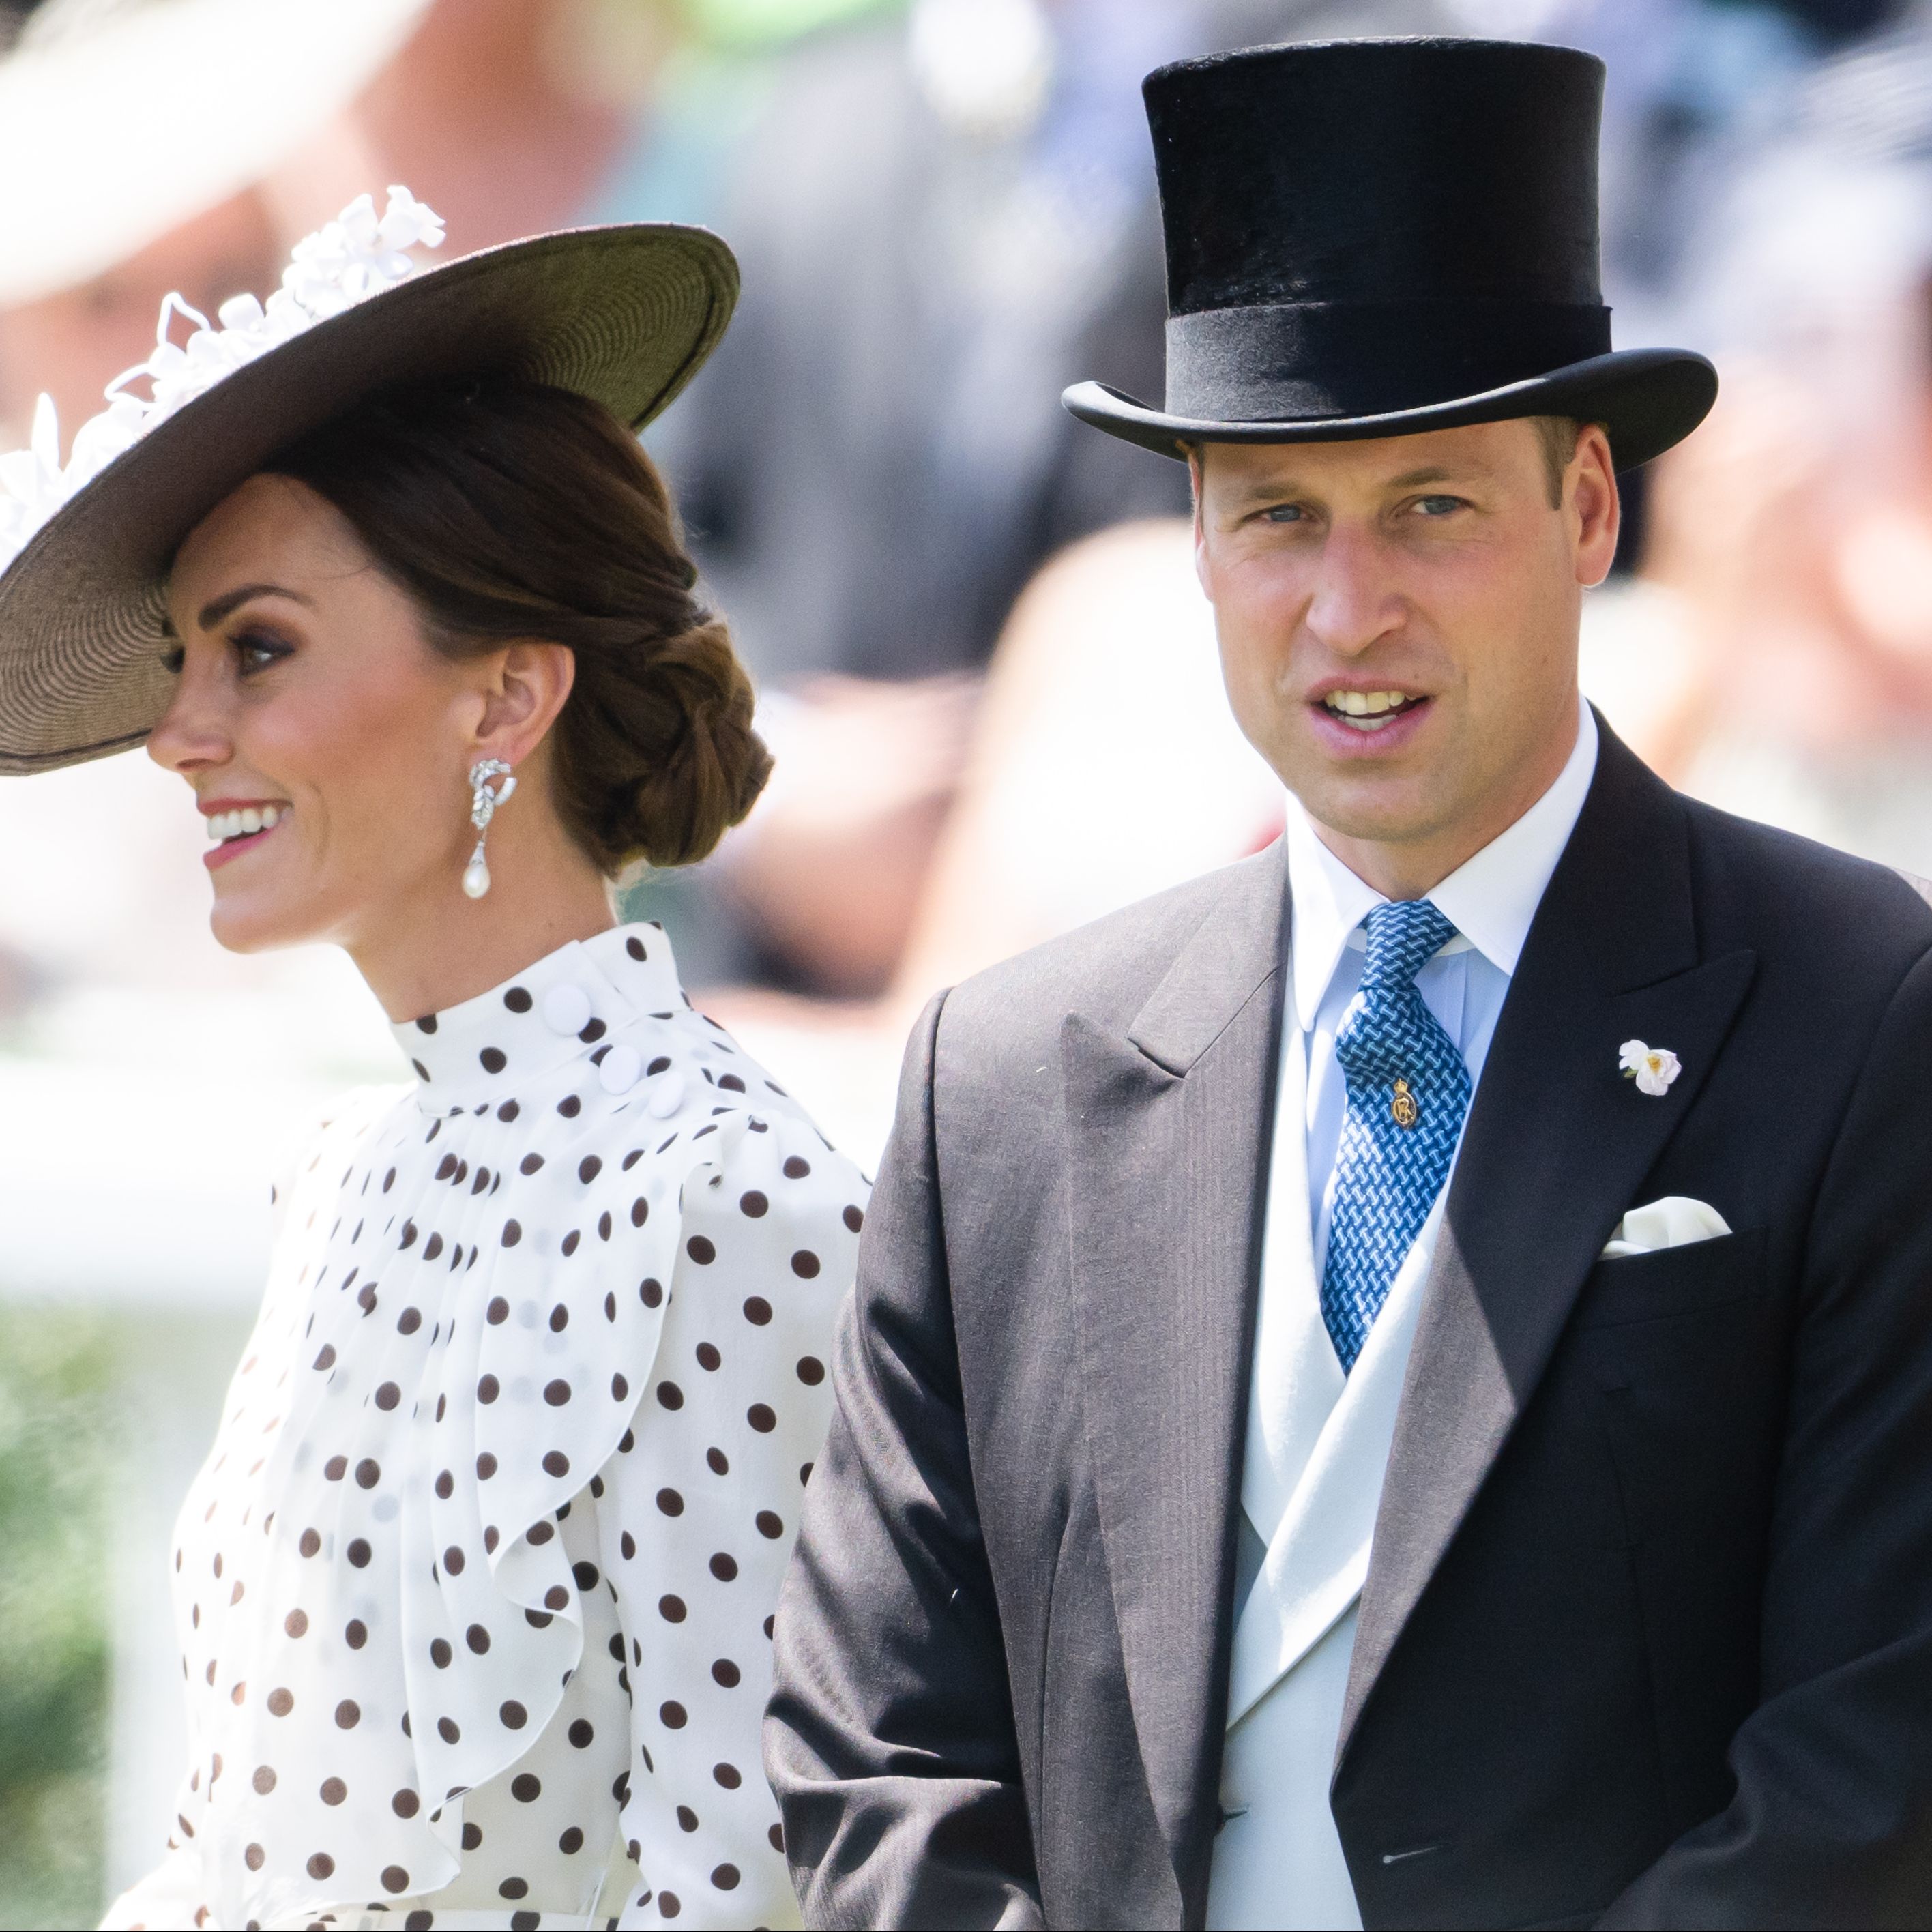 Friends of William and Kate Anonymously Spoke About Those Relationship Rumors